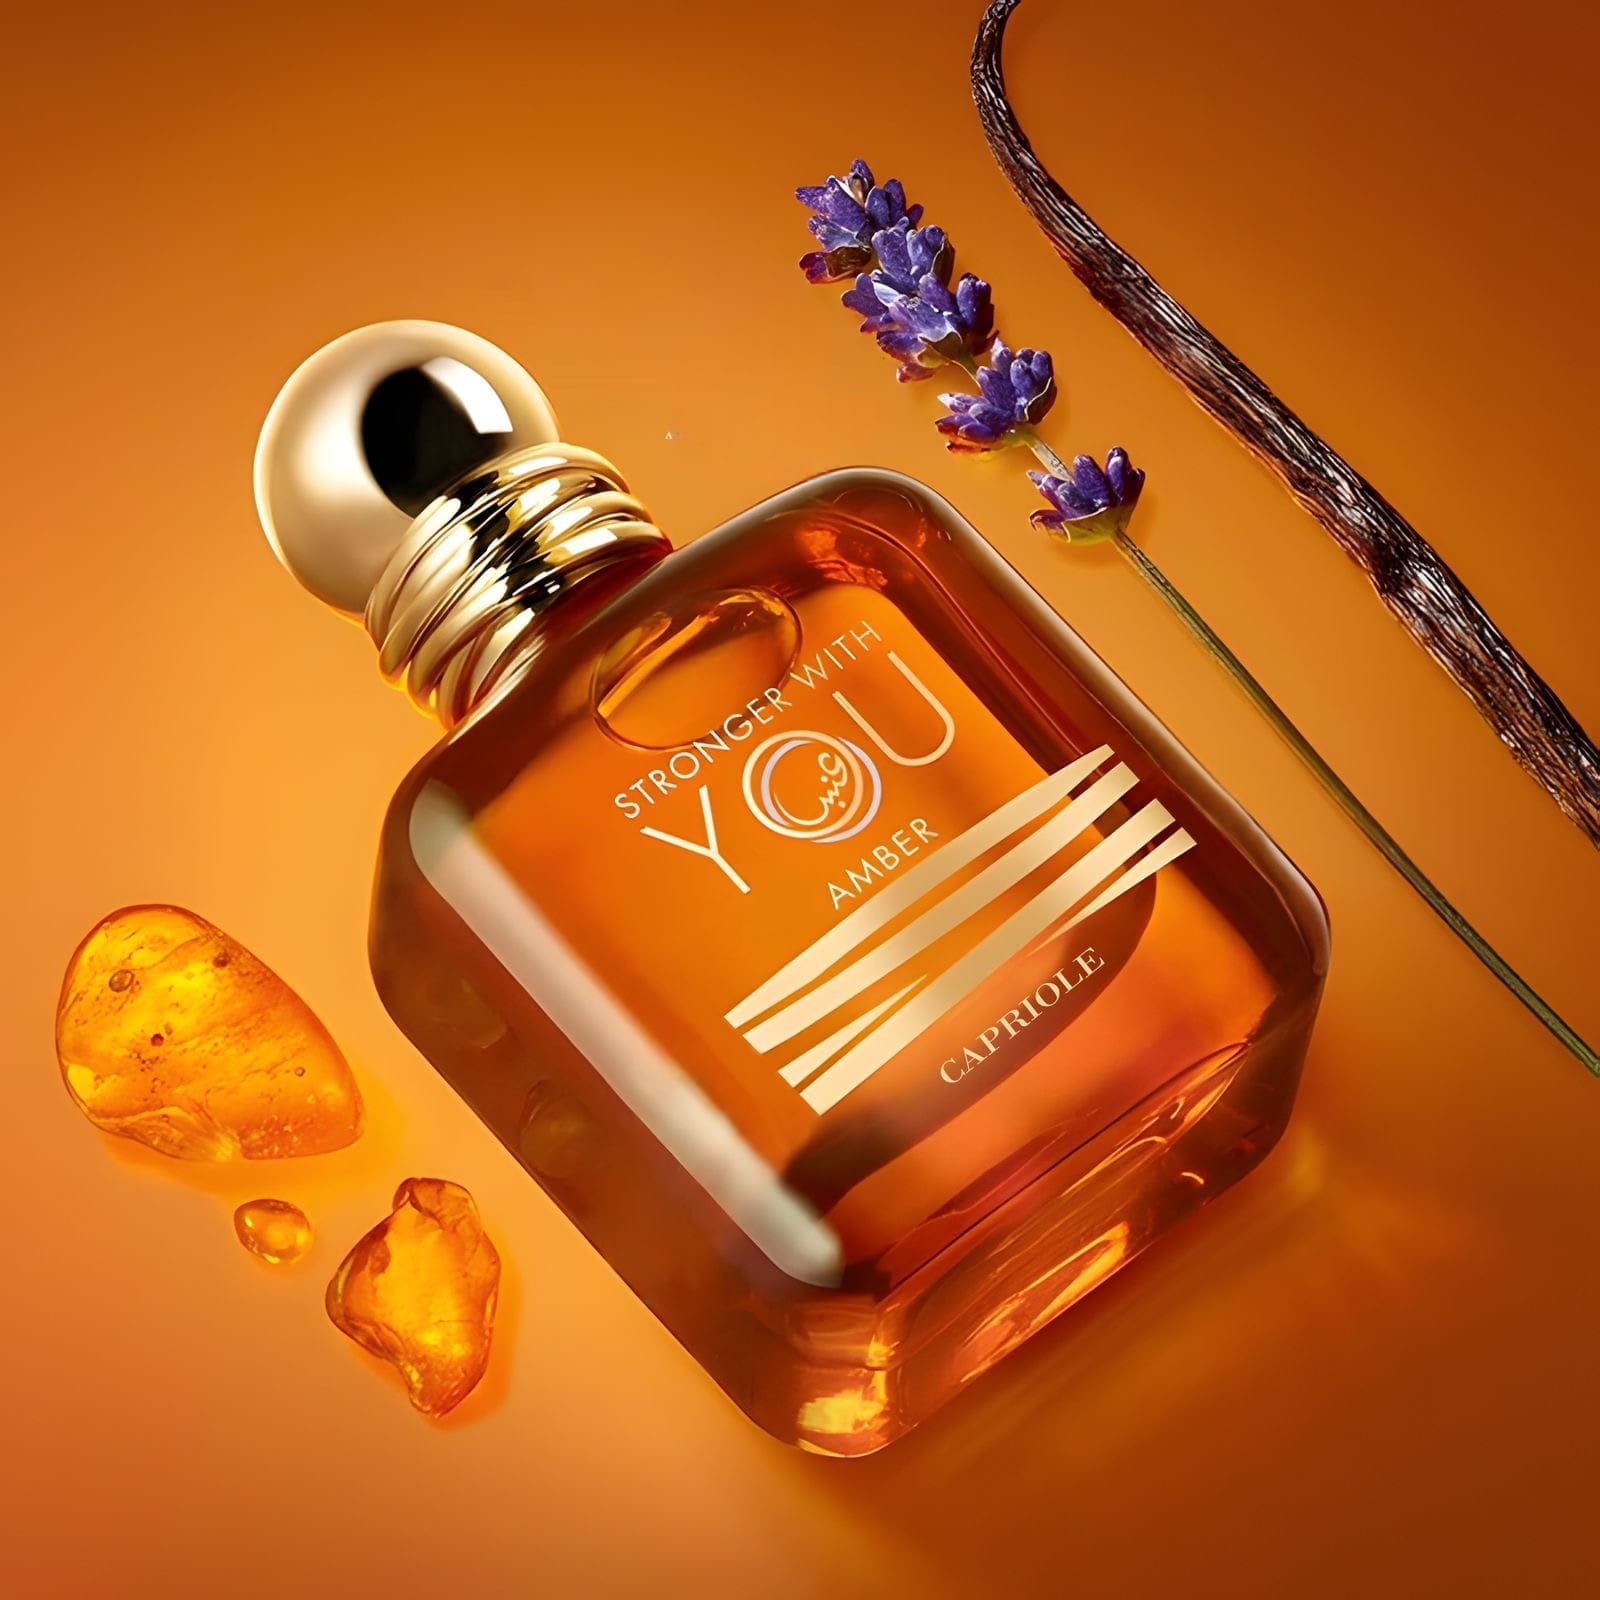 3788 CAPRIOLE STRONGER WITH YOU AMBRE 100ml EDP